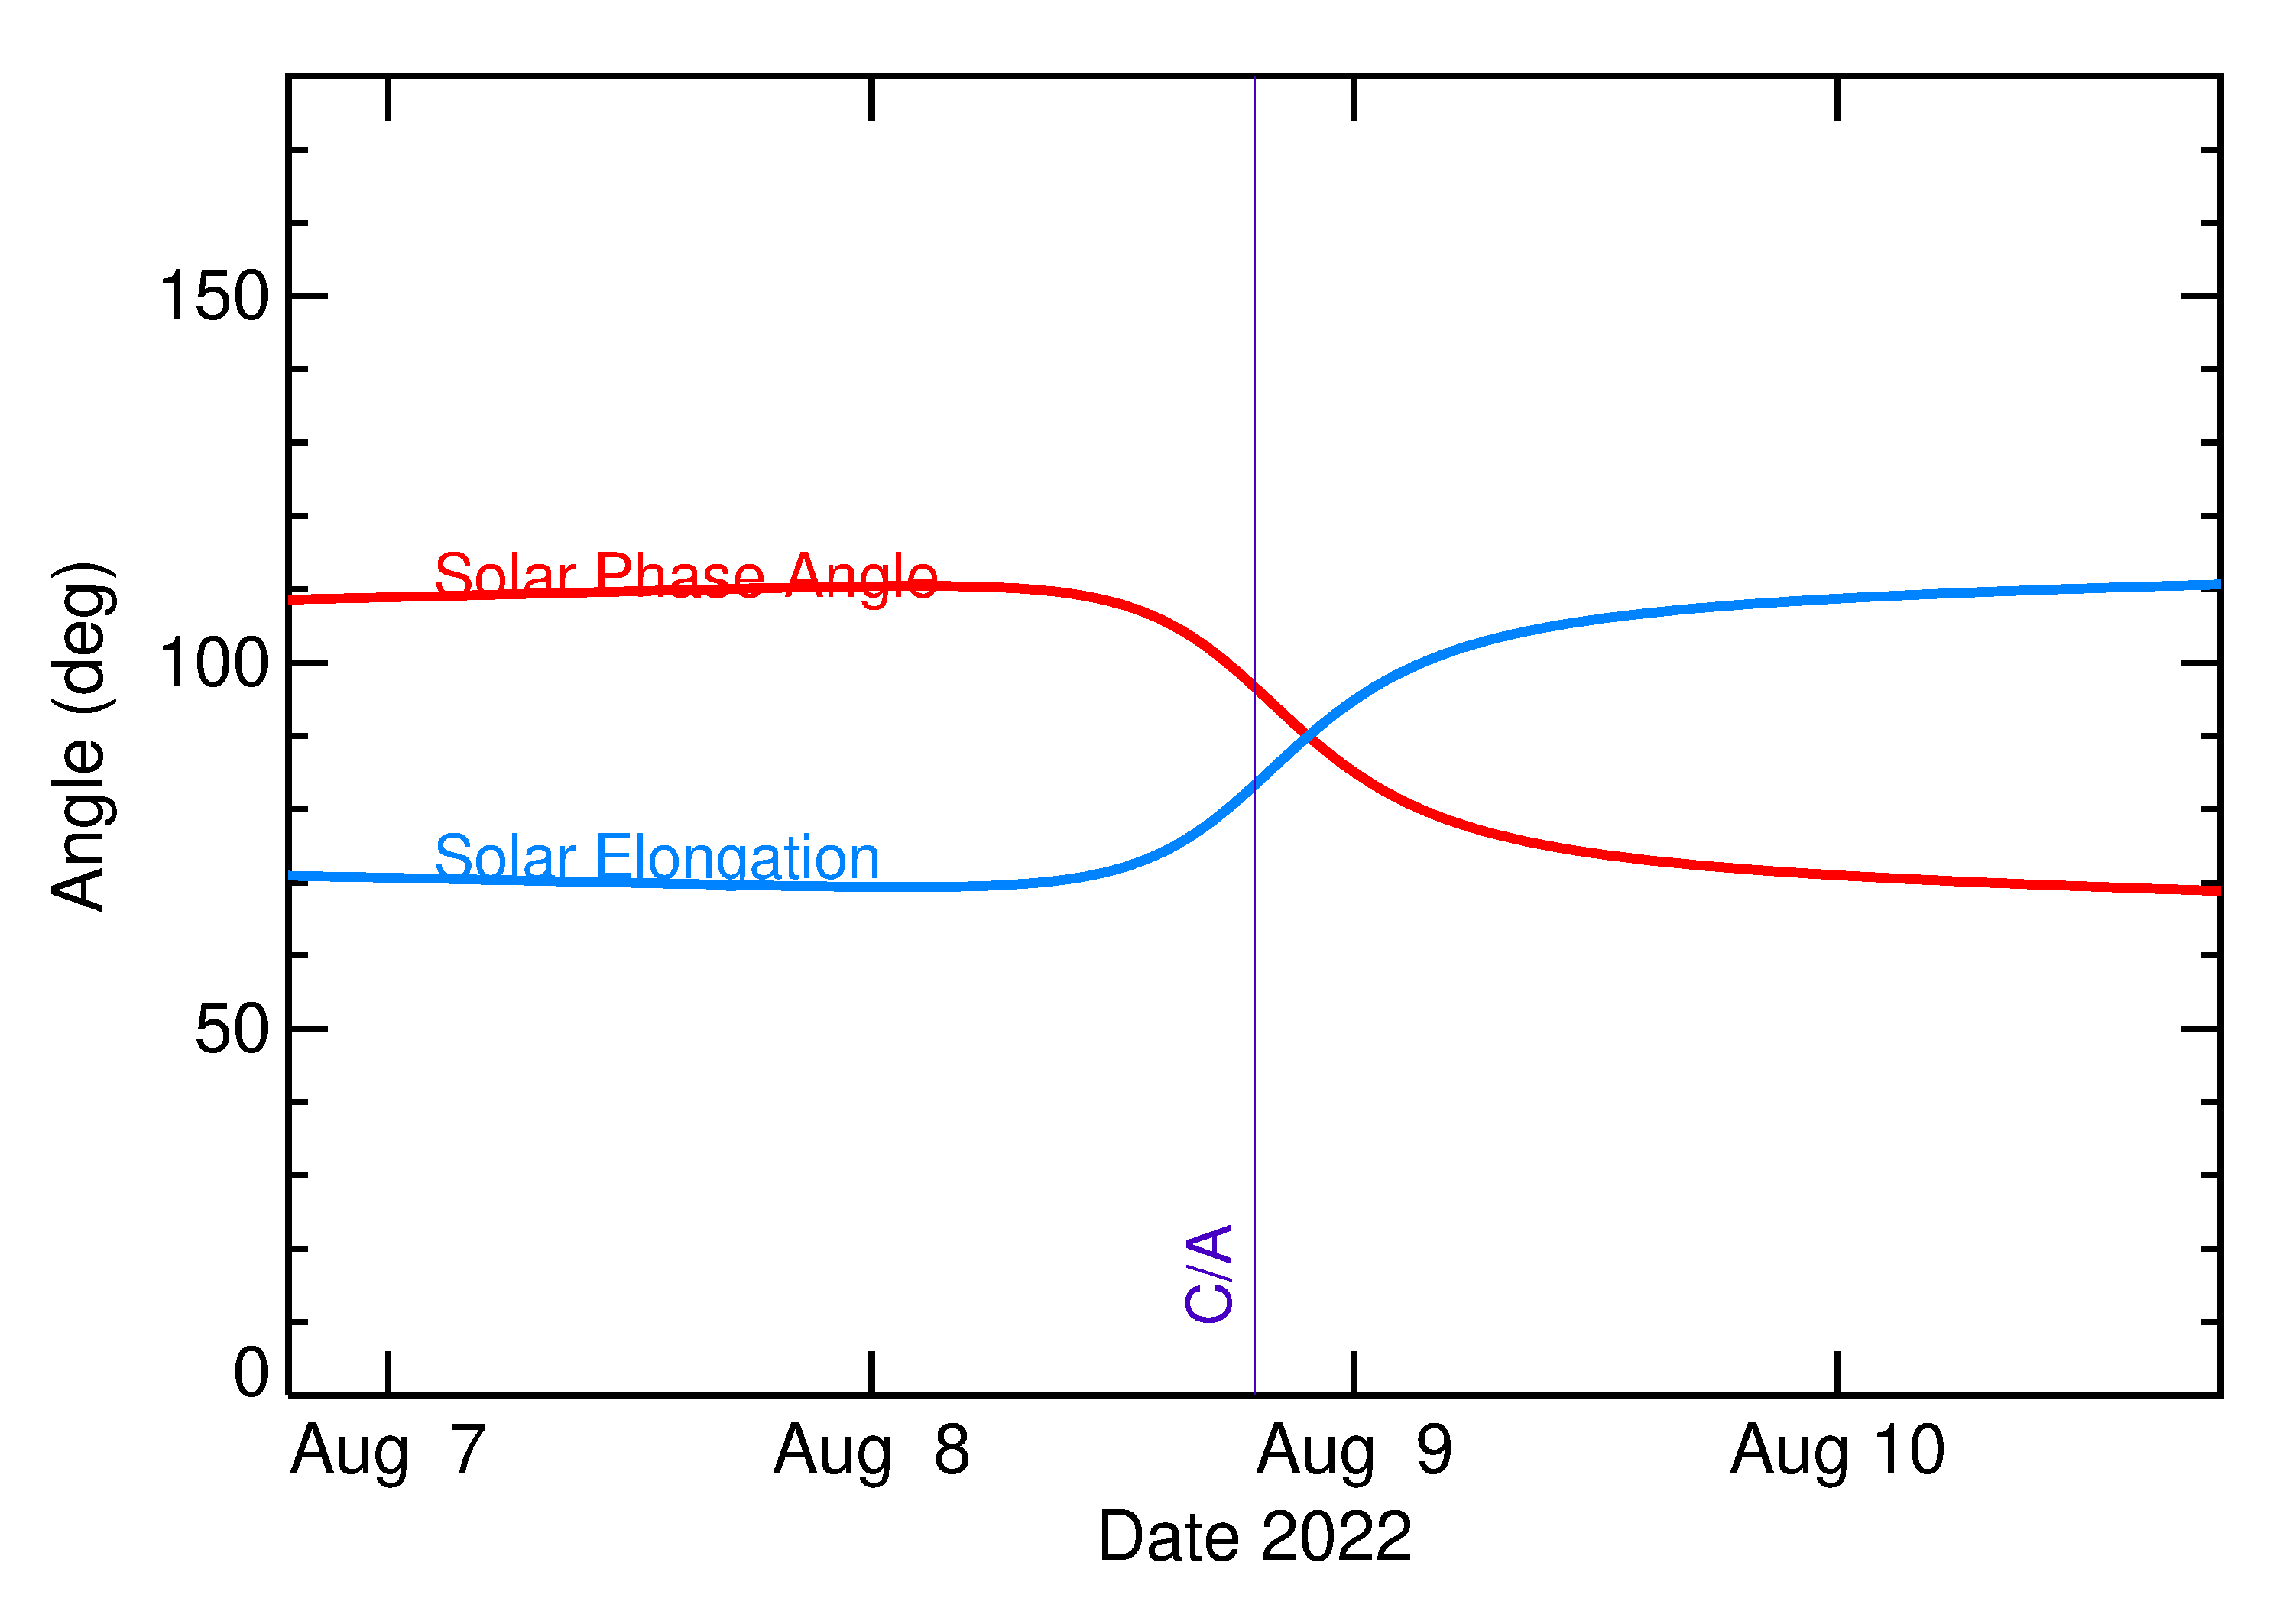 Solar Elongation and Solar Phase Angle of 2022 PW1 in the days around closest approach